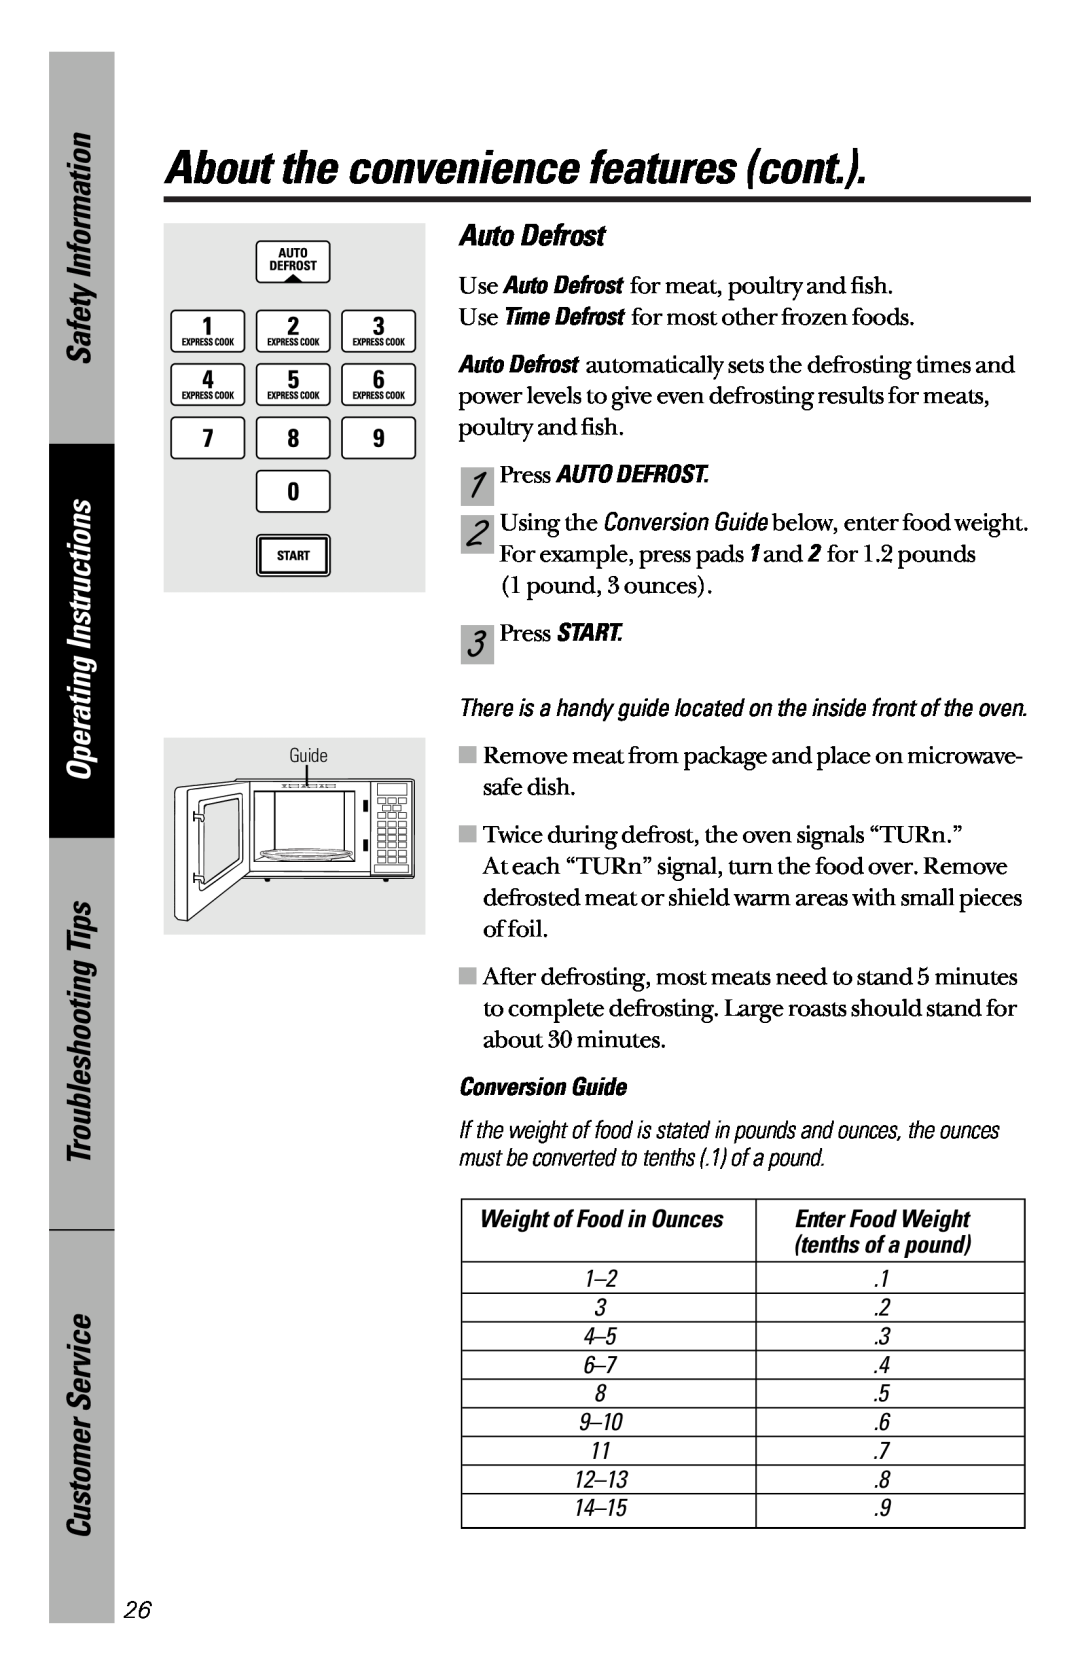 GE JES1339 owner manual Auto Defrost, About the convenience features cont, Safety Information, Operating Instructions 